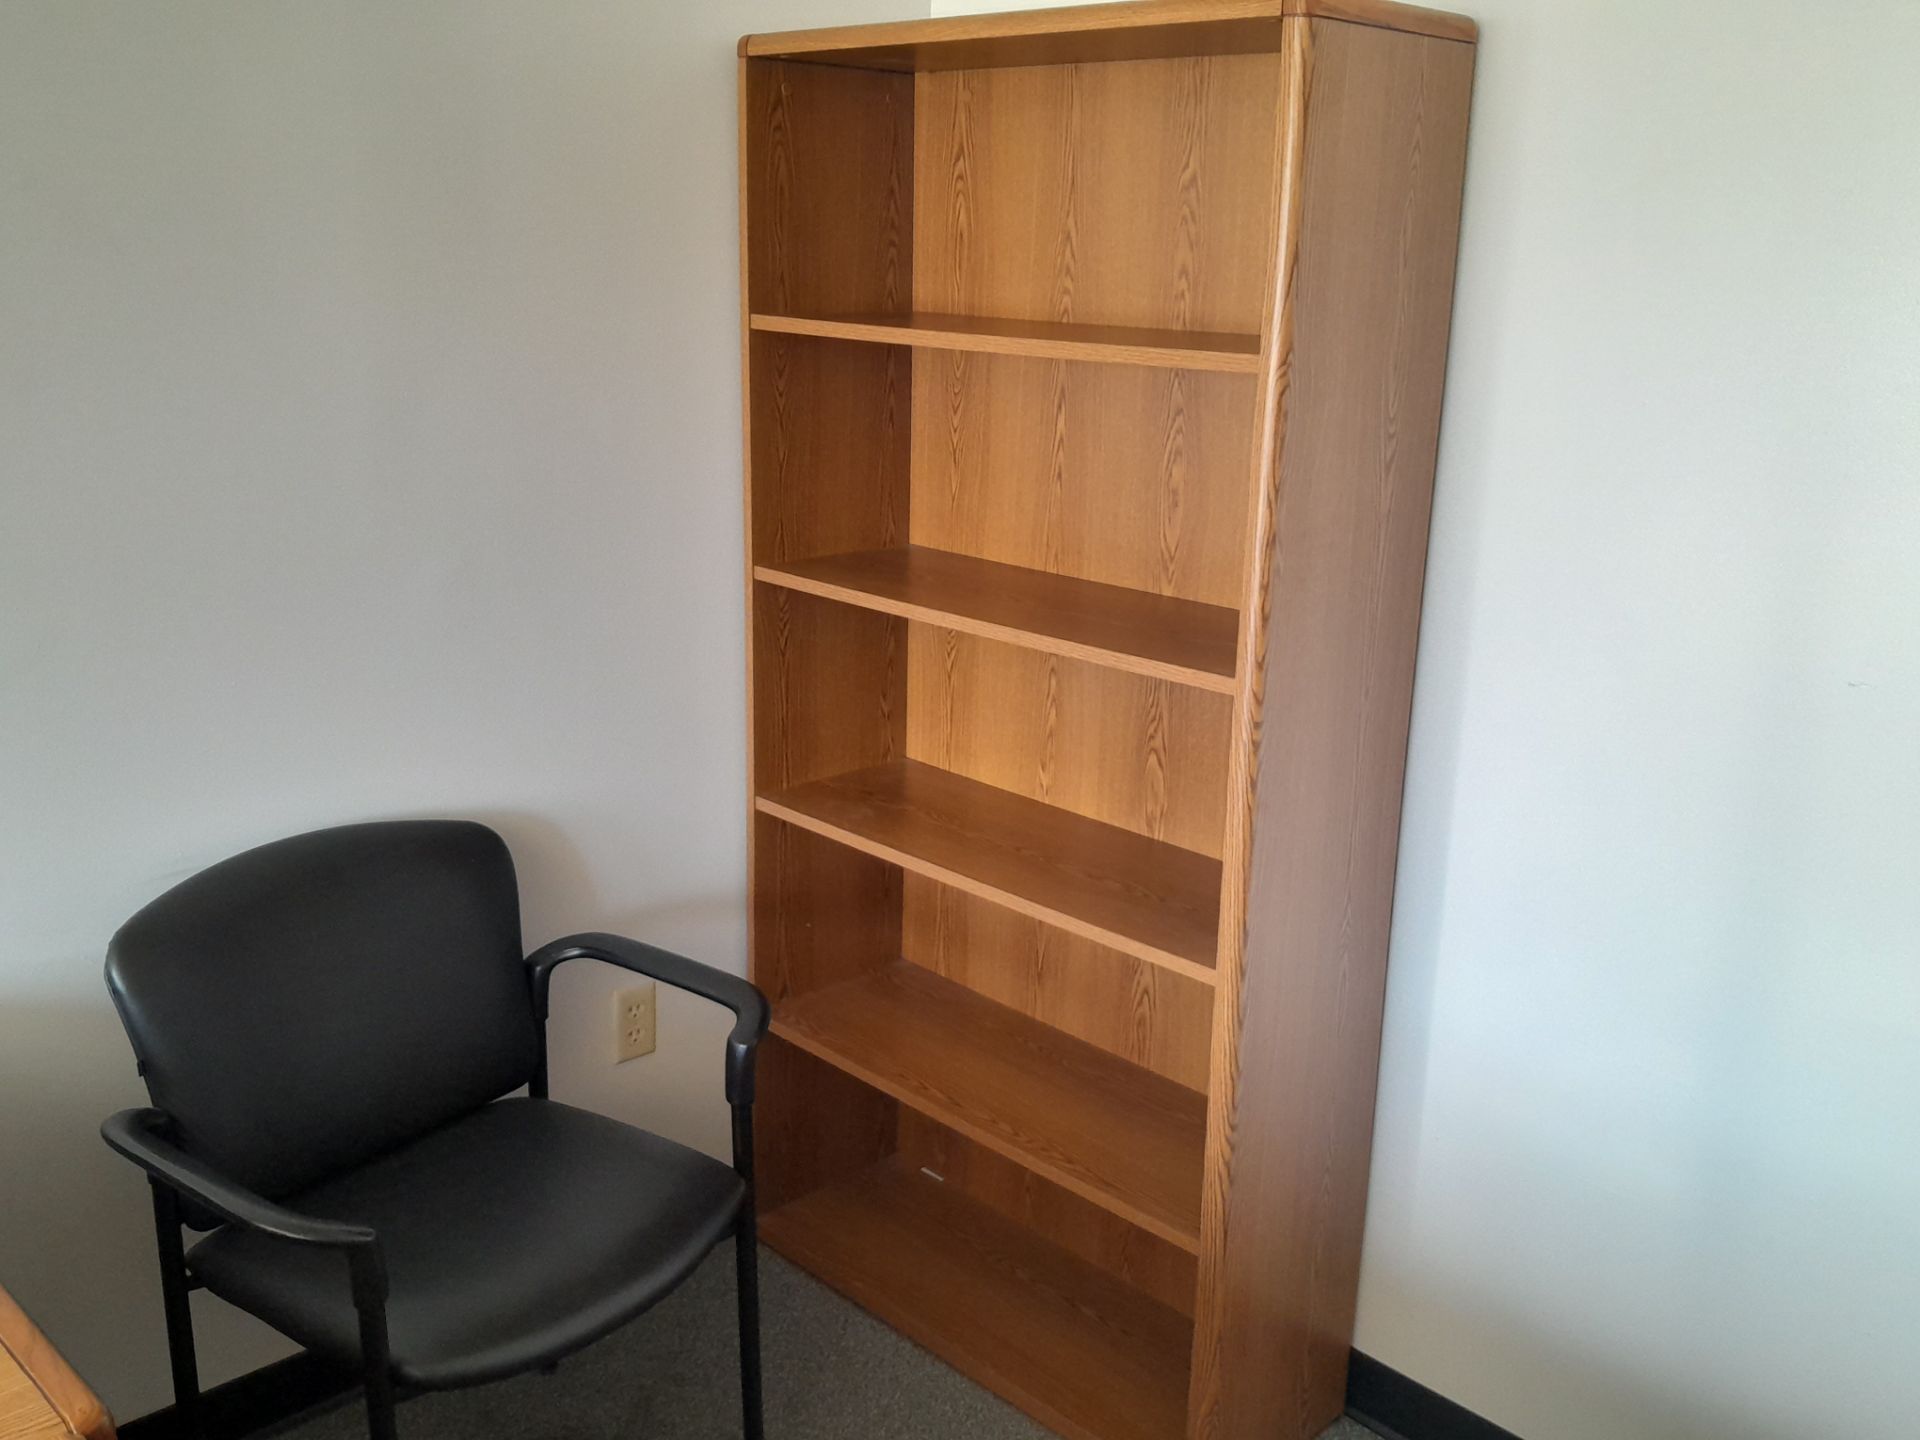 72" X 96" L-SHAPED DESK, (3) 4-DRAWER LATERAL CABINETS, (1) BOOK CASE, (3) CHAIRS - Image 3 of 3